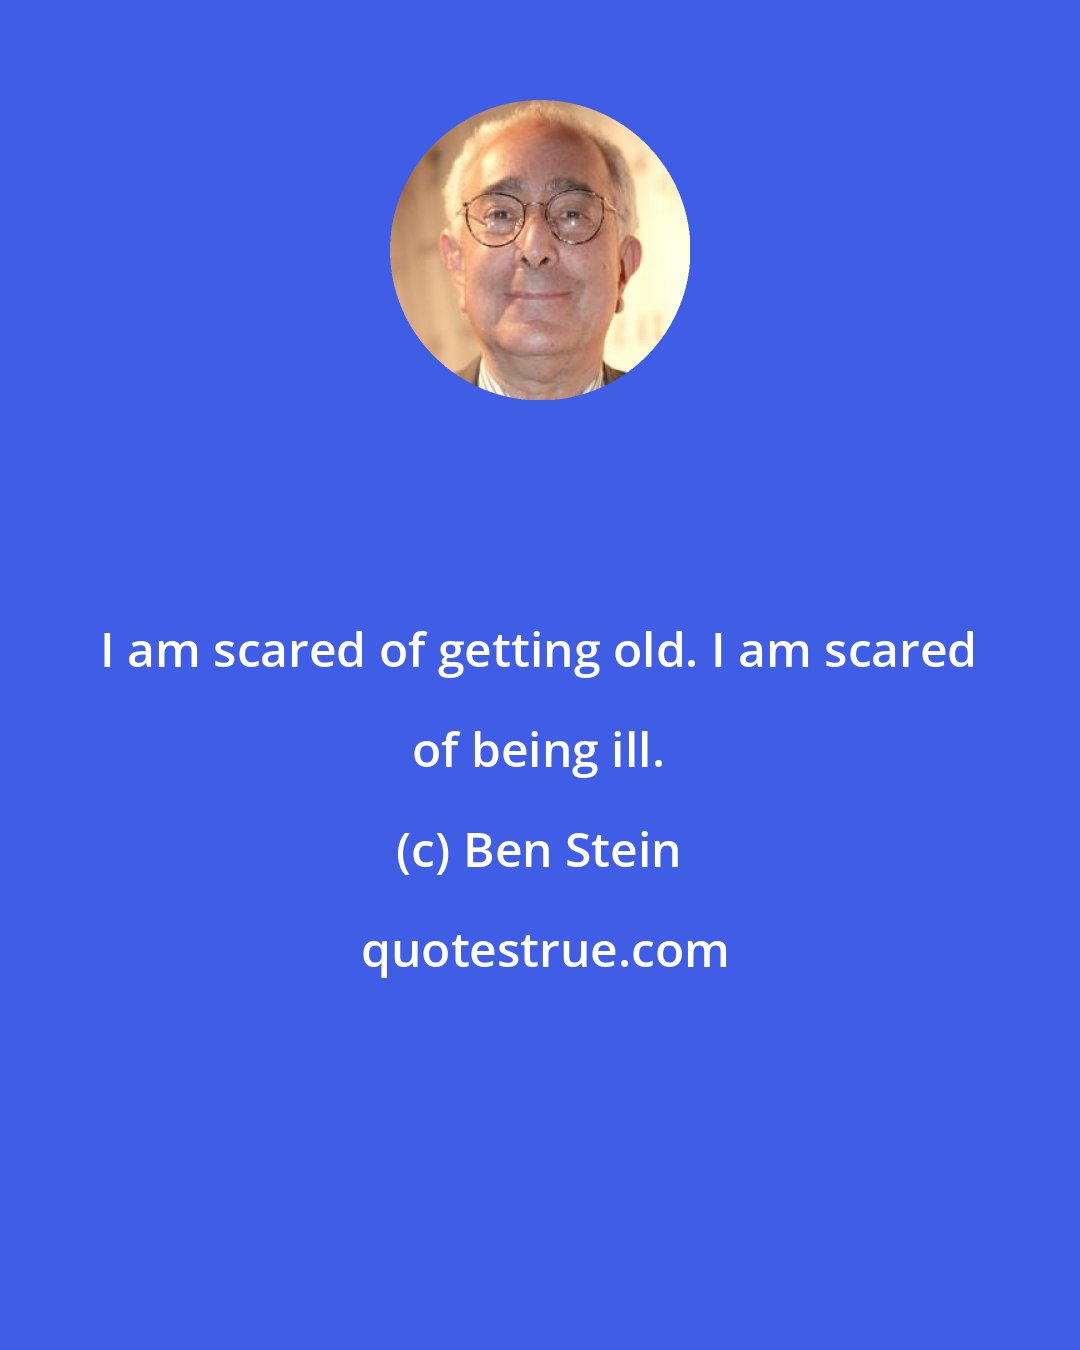 Ben Stein: I am scared of getting old. I am scared of being ill.